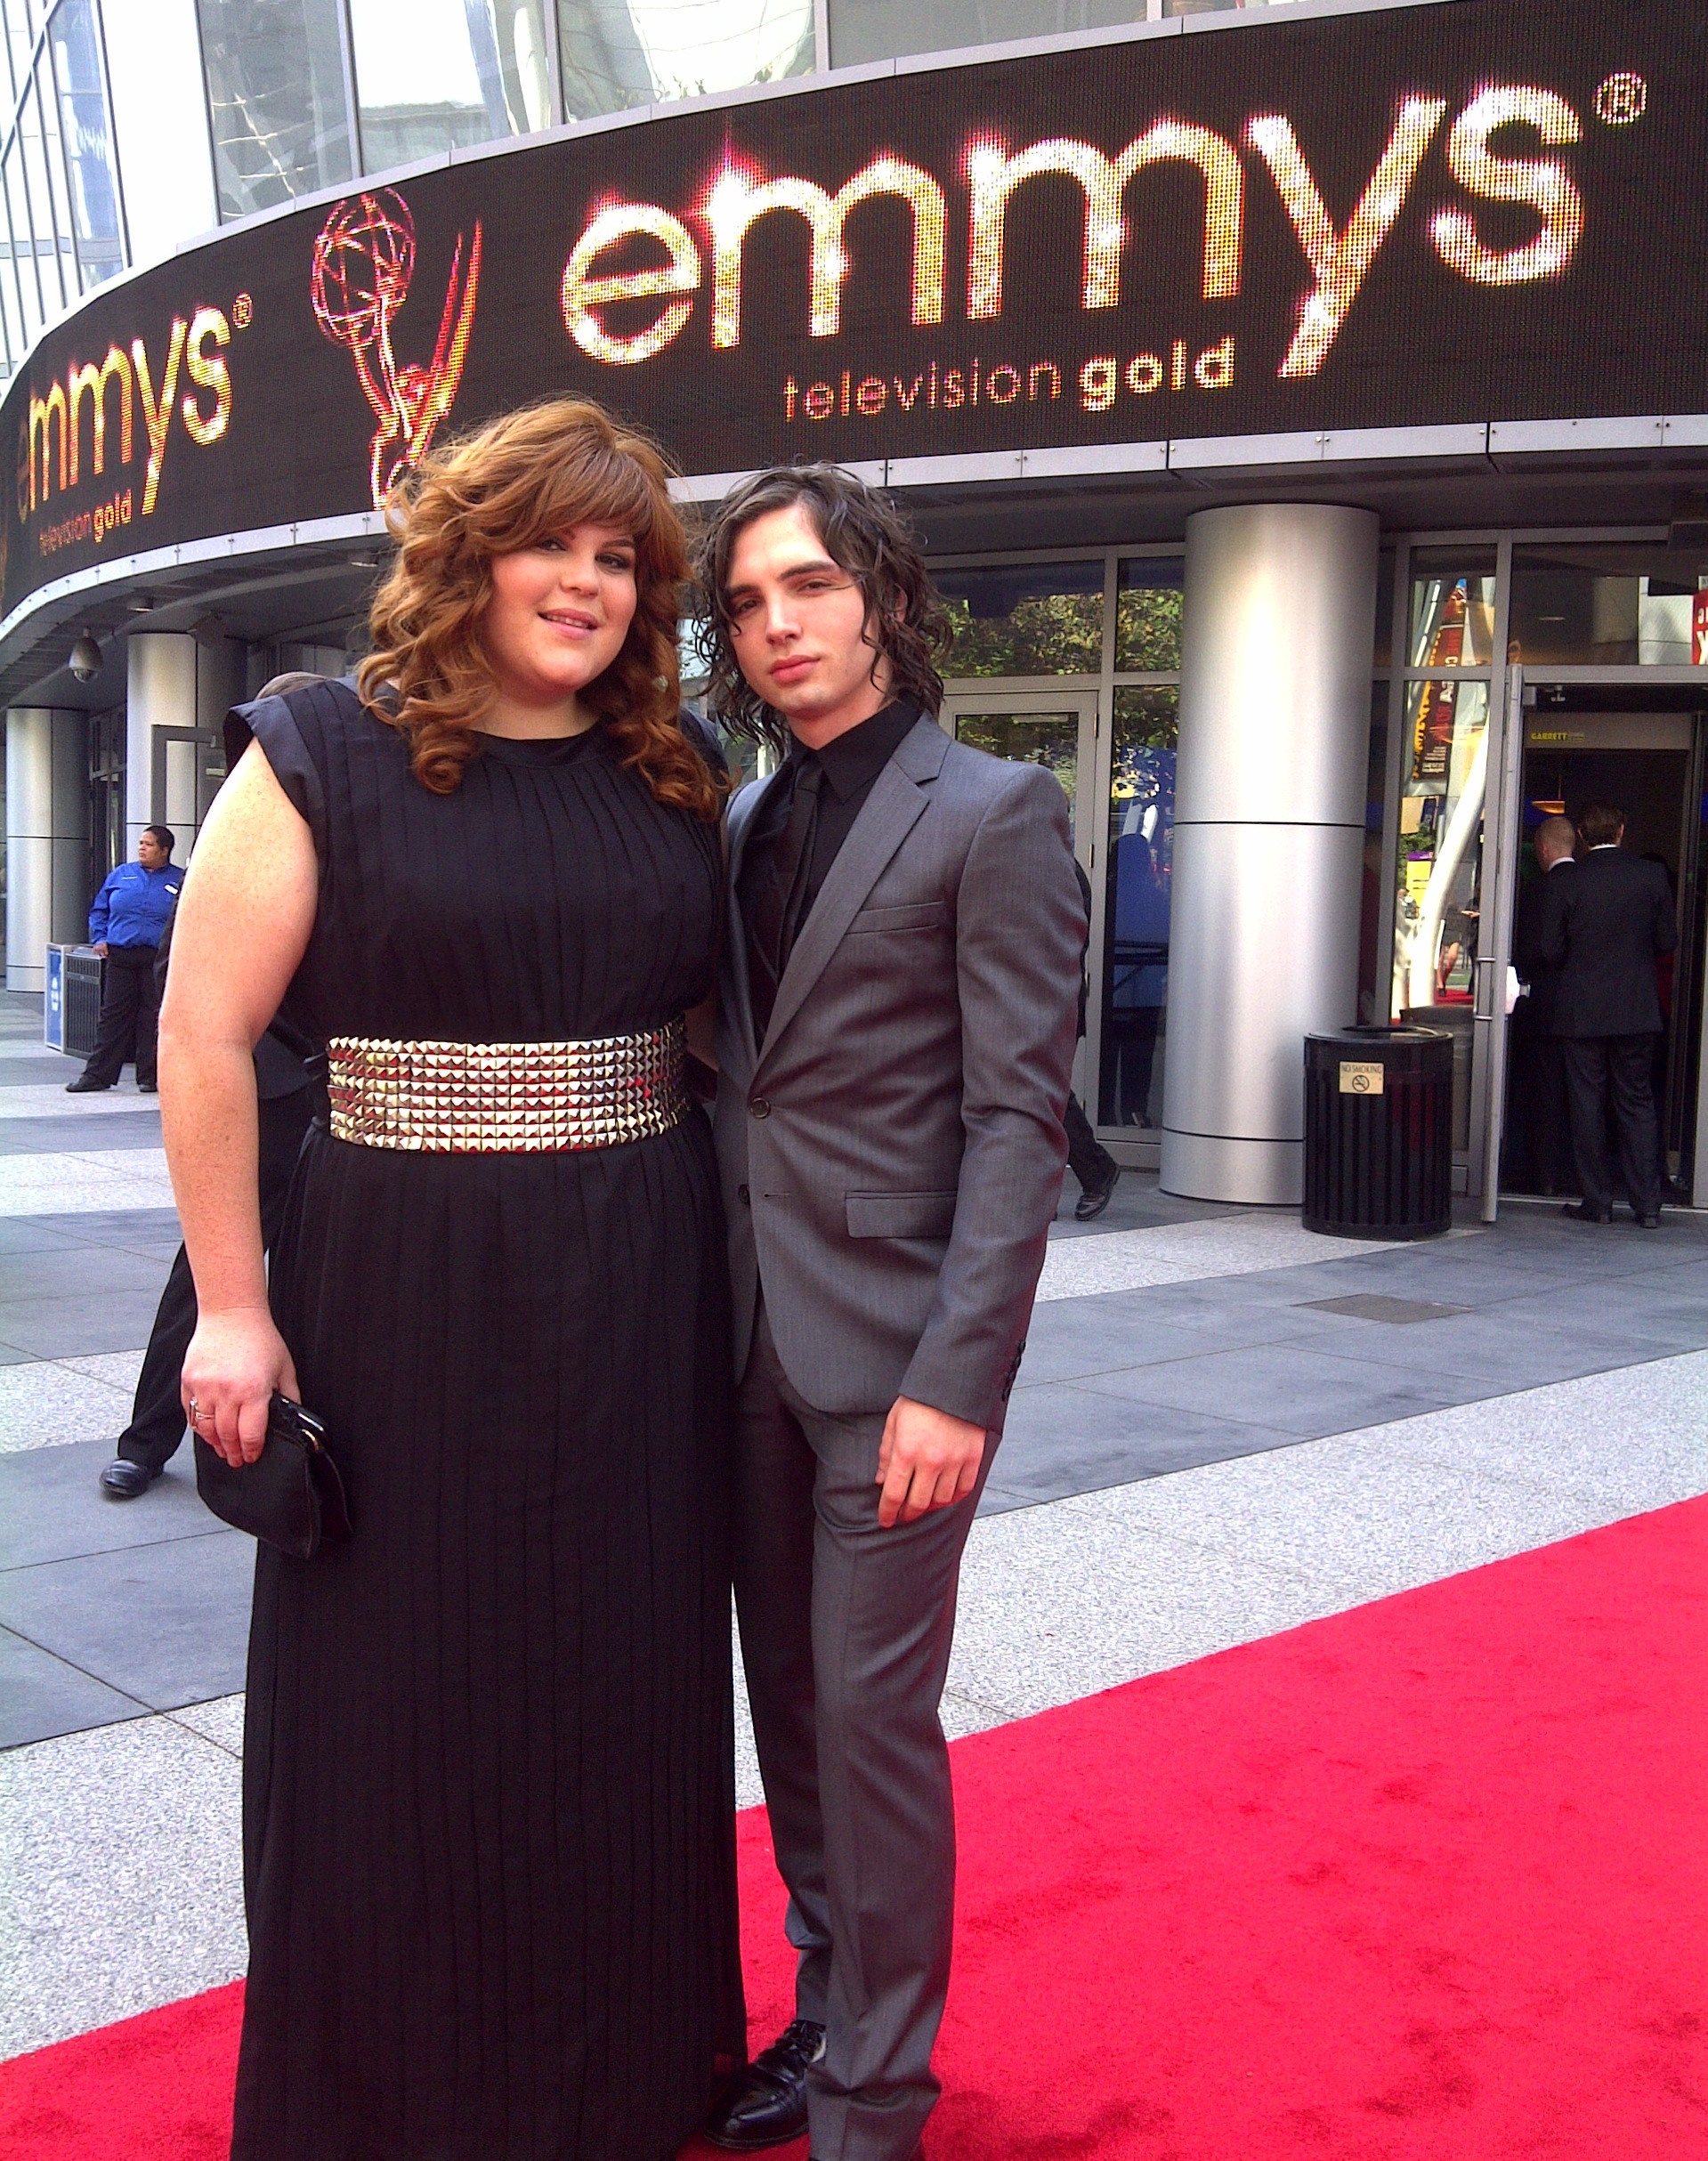 August Emerson & Melissa Buell attend the 2011 Primetime Emmy Awards.